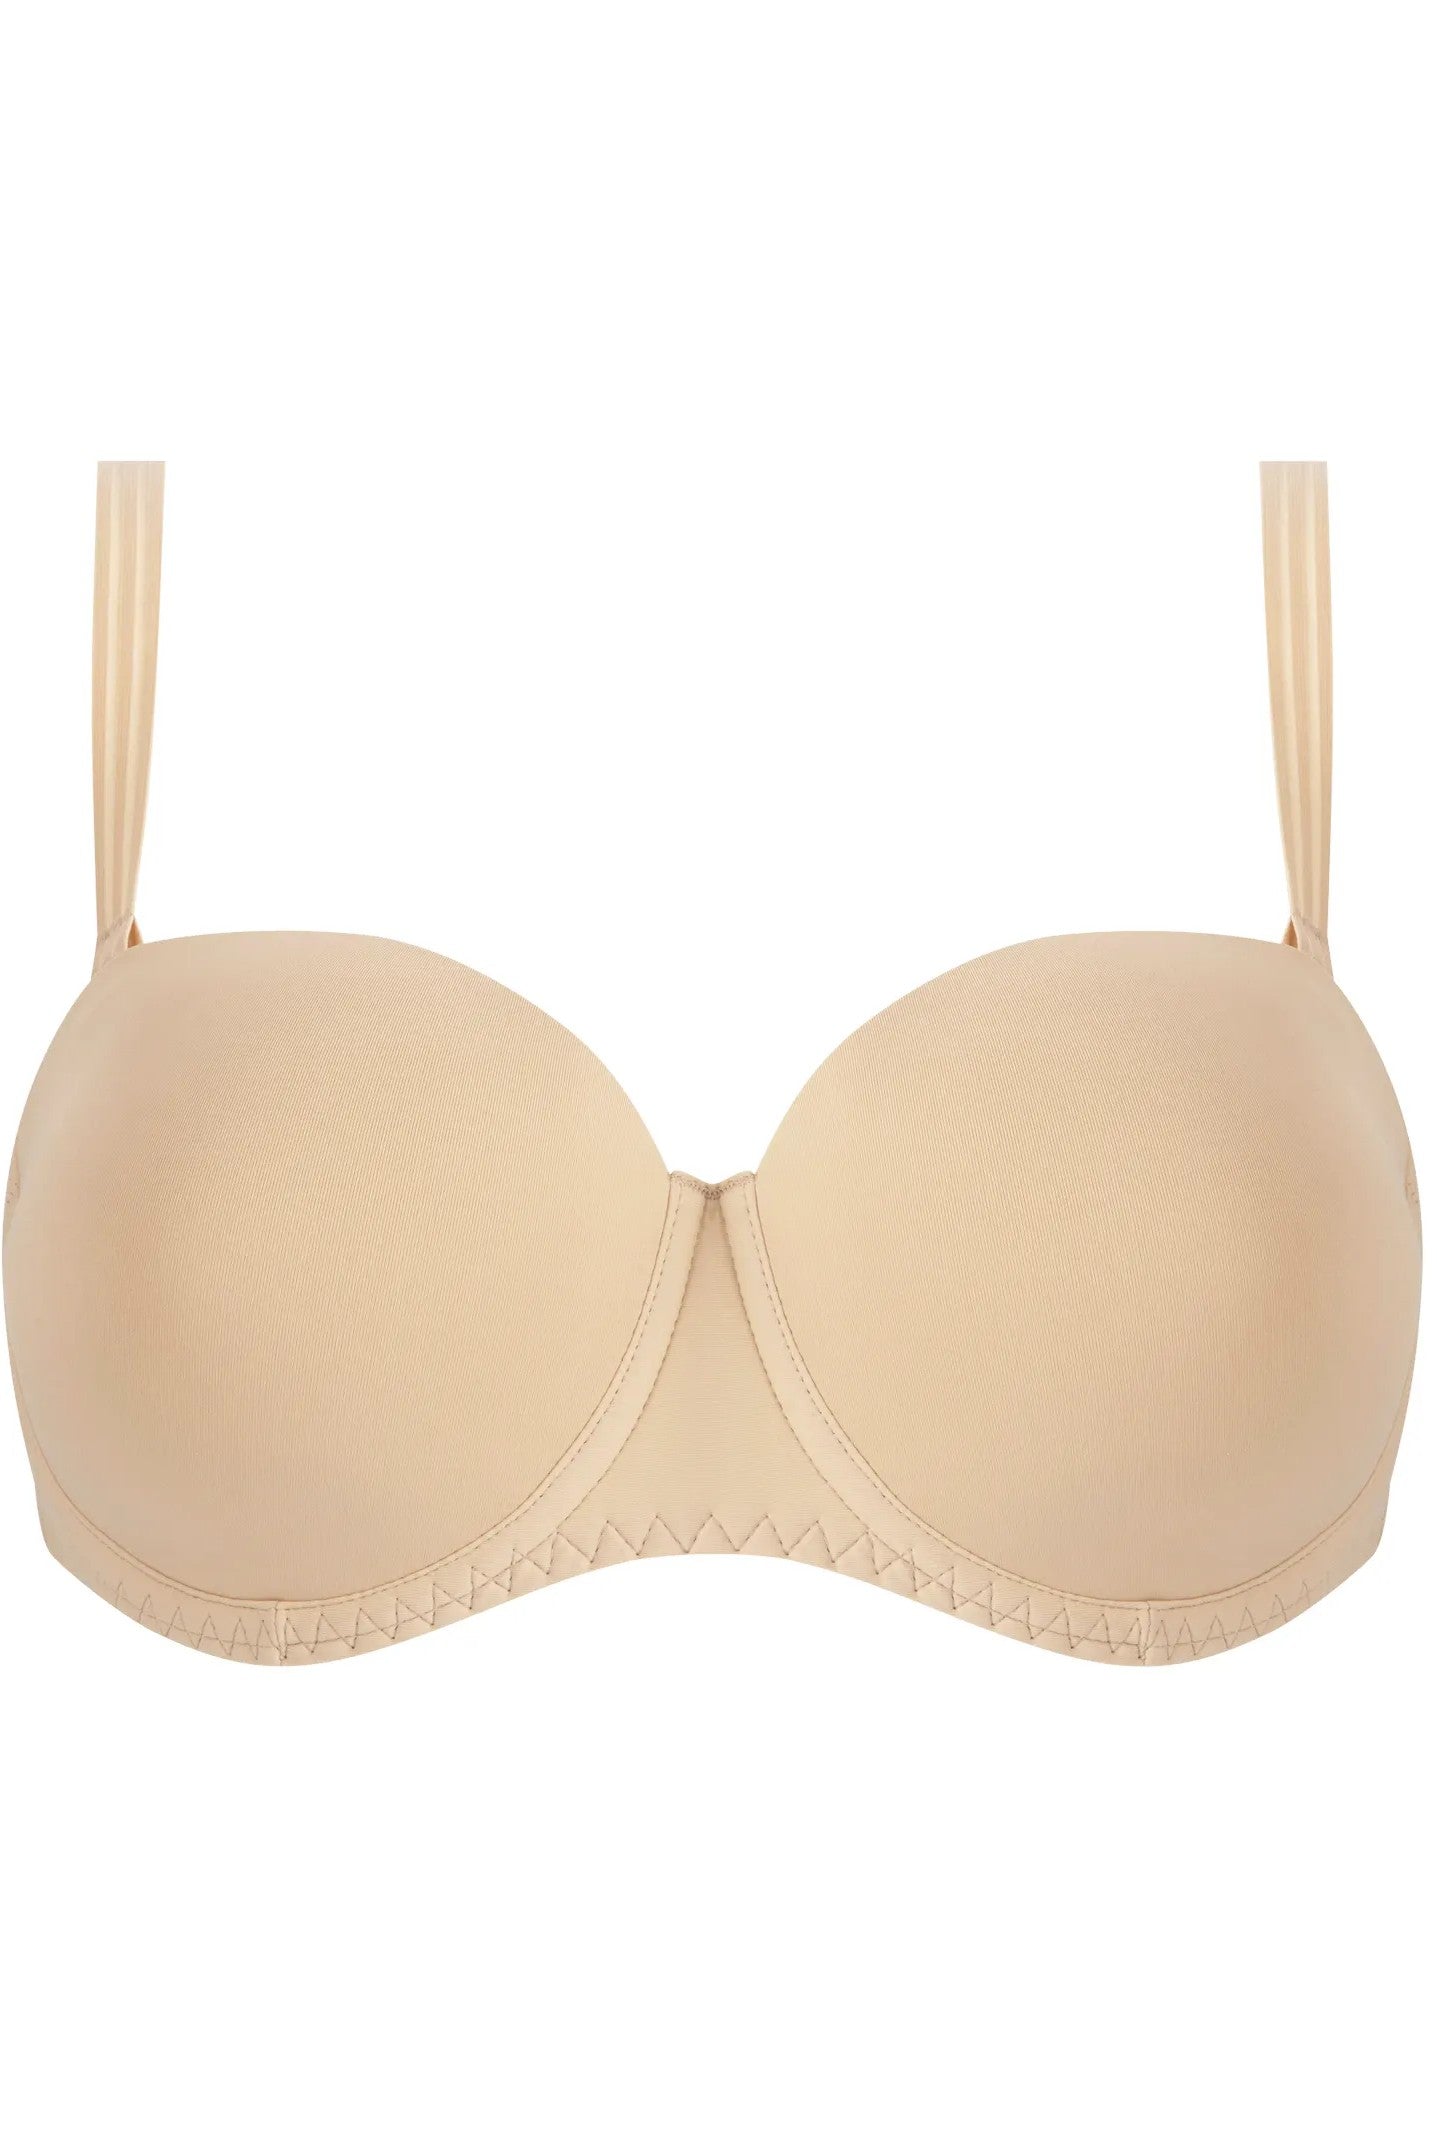 Chantelle Norah Comfort Strapless Convertible Bra in Nude Rose - Busted Bra  Shop